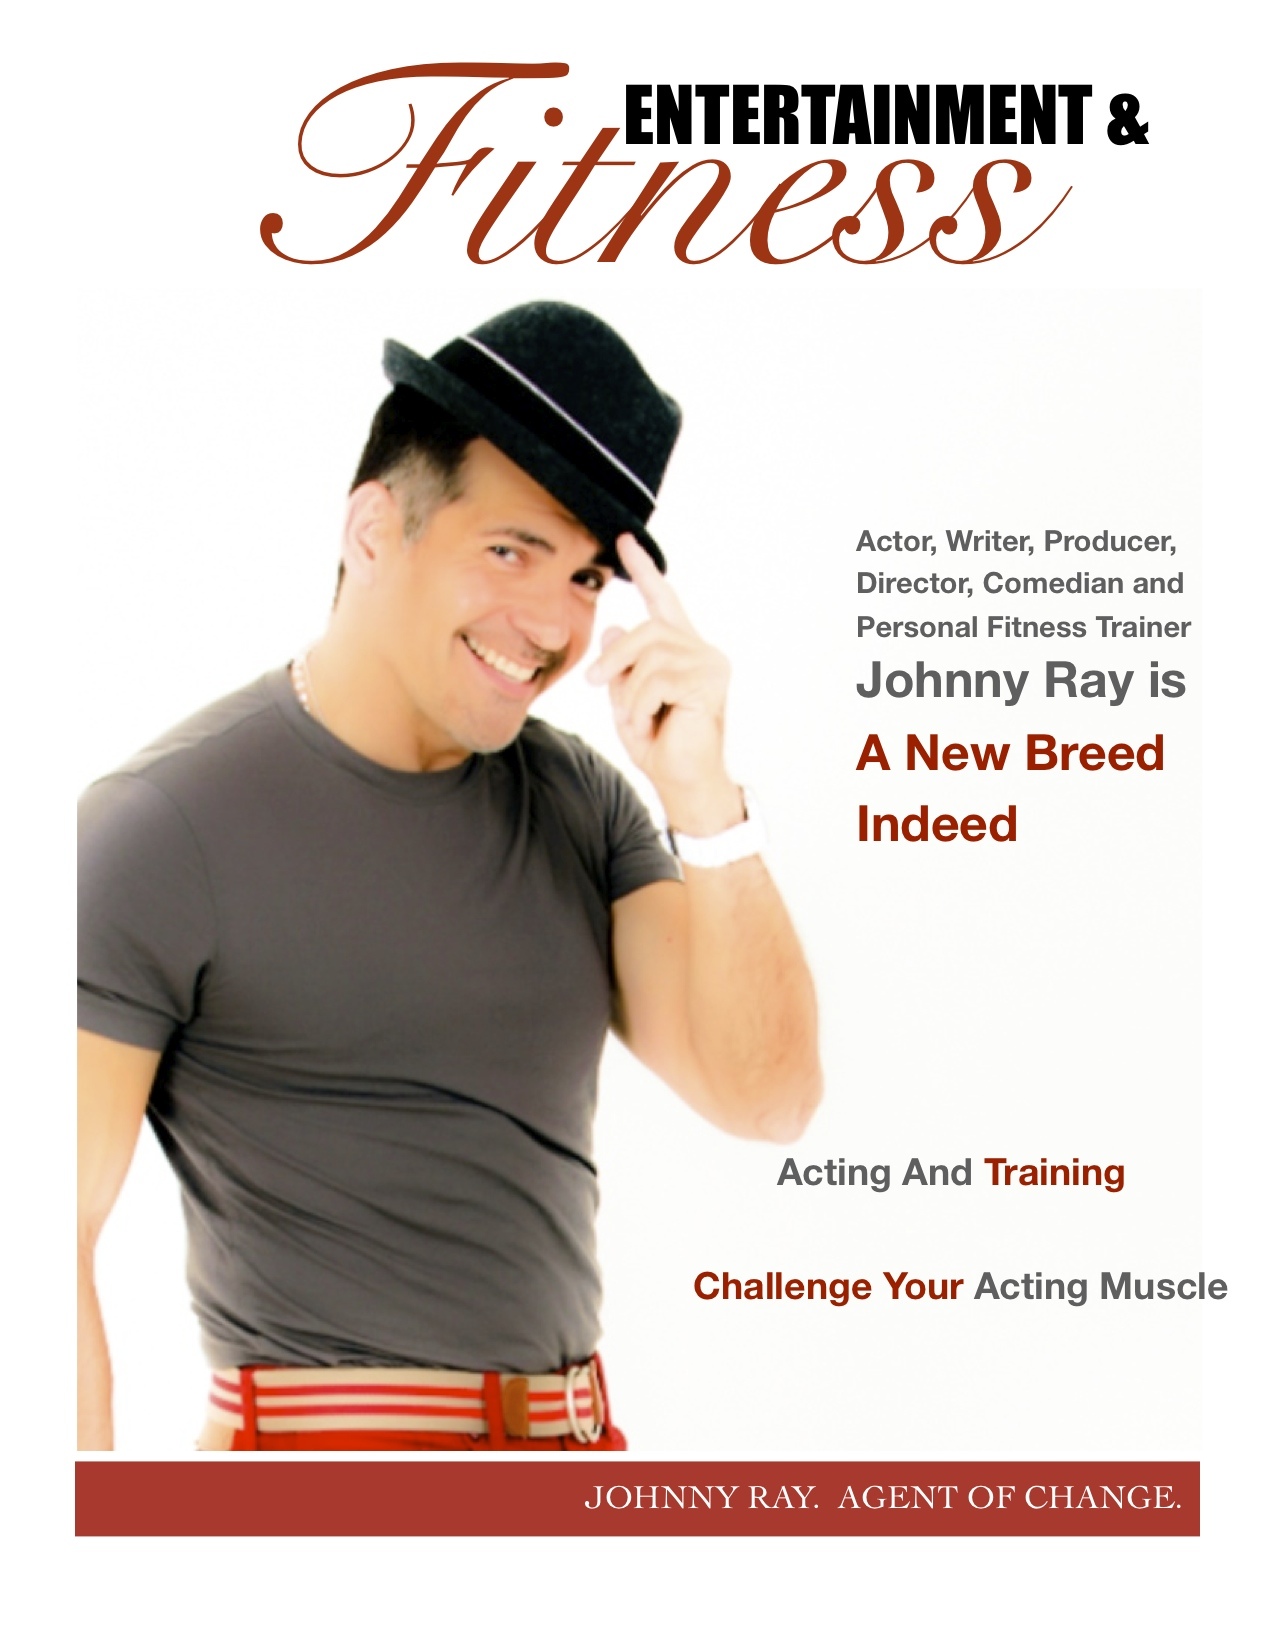 Cover for an article I wrote about how training for acting is like training at the gym.